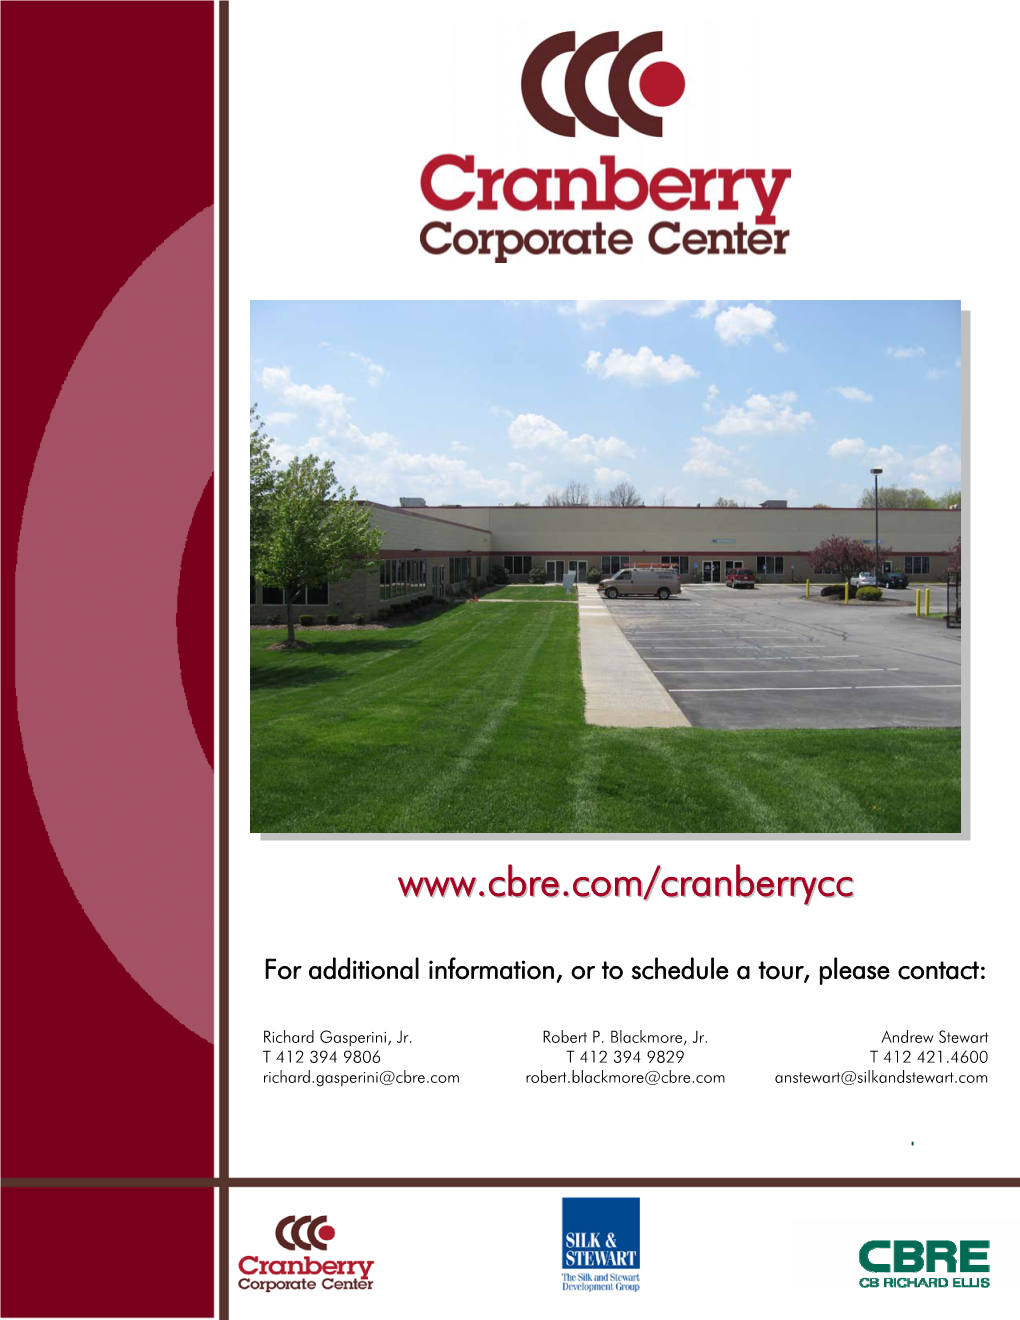 Cranberry Corporate Center, a Six-Building Flex Office/Warehouse Complex Totaling Nearly 215,000 SF, Is Situated on 21 Acres in Butler County, PA